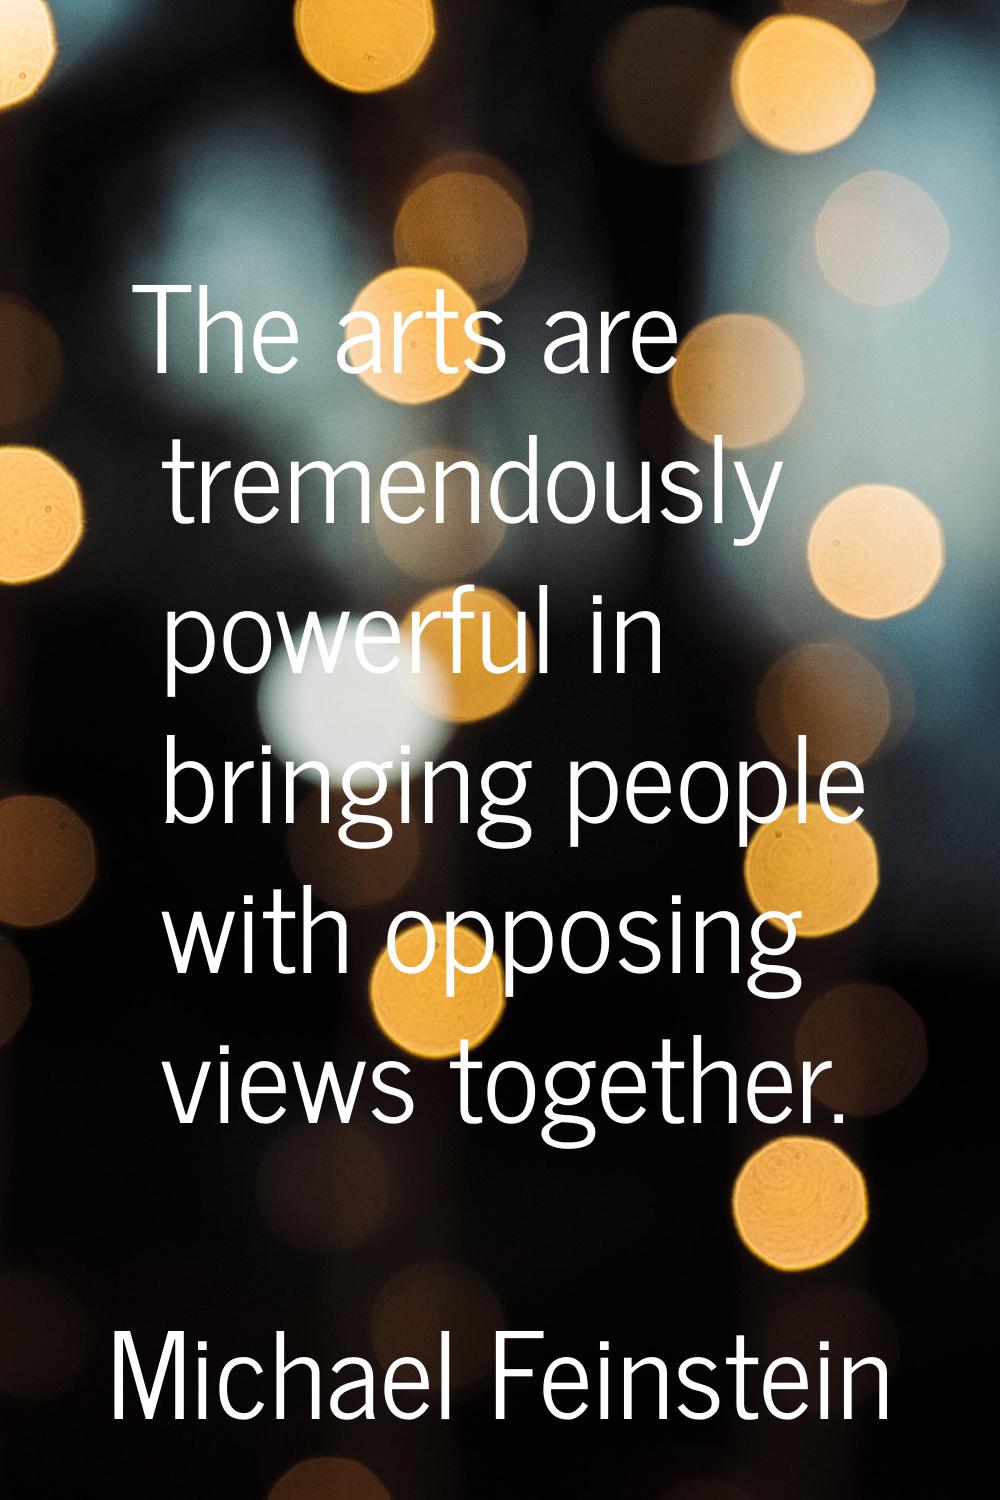 The arts are tremendously powerful in bringing people with opposing views together.